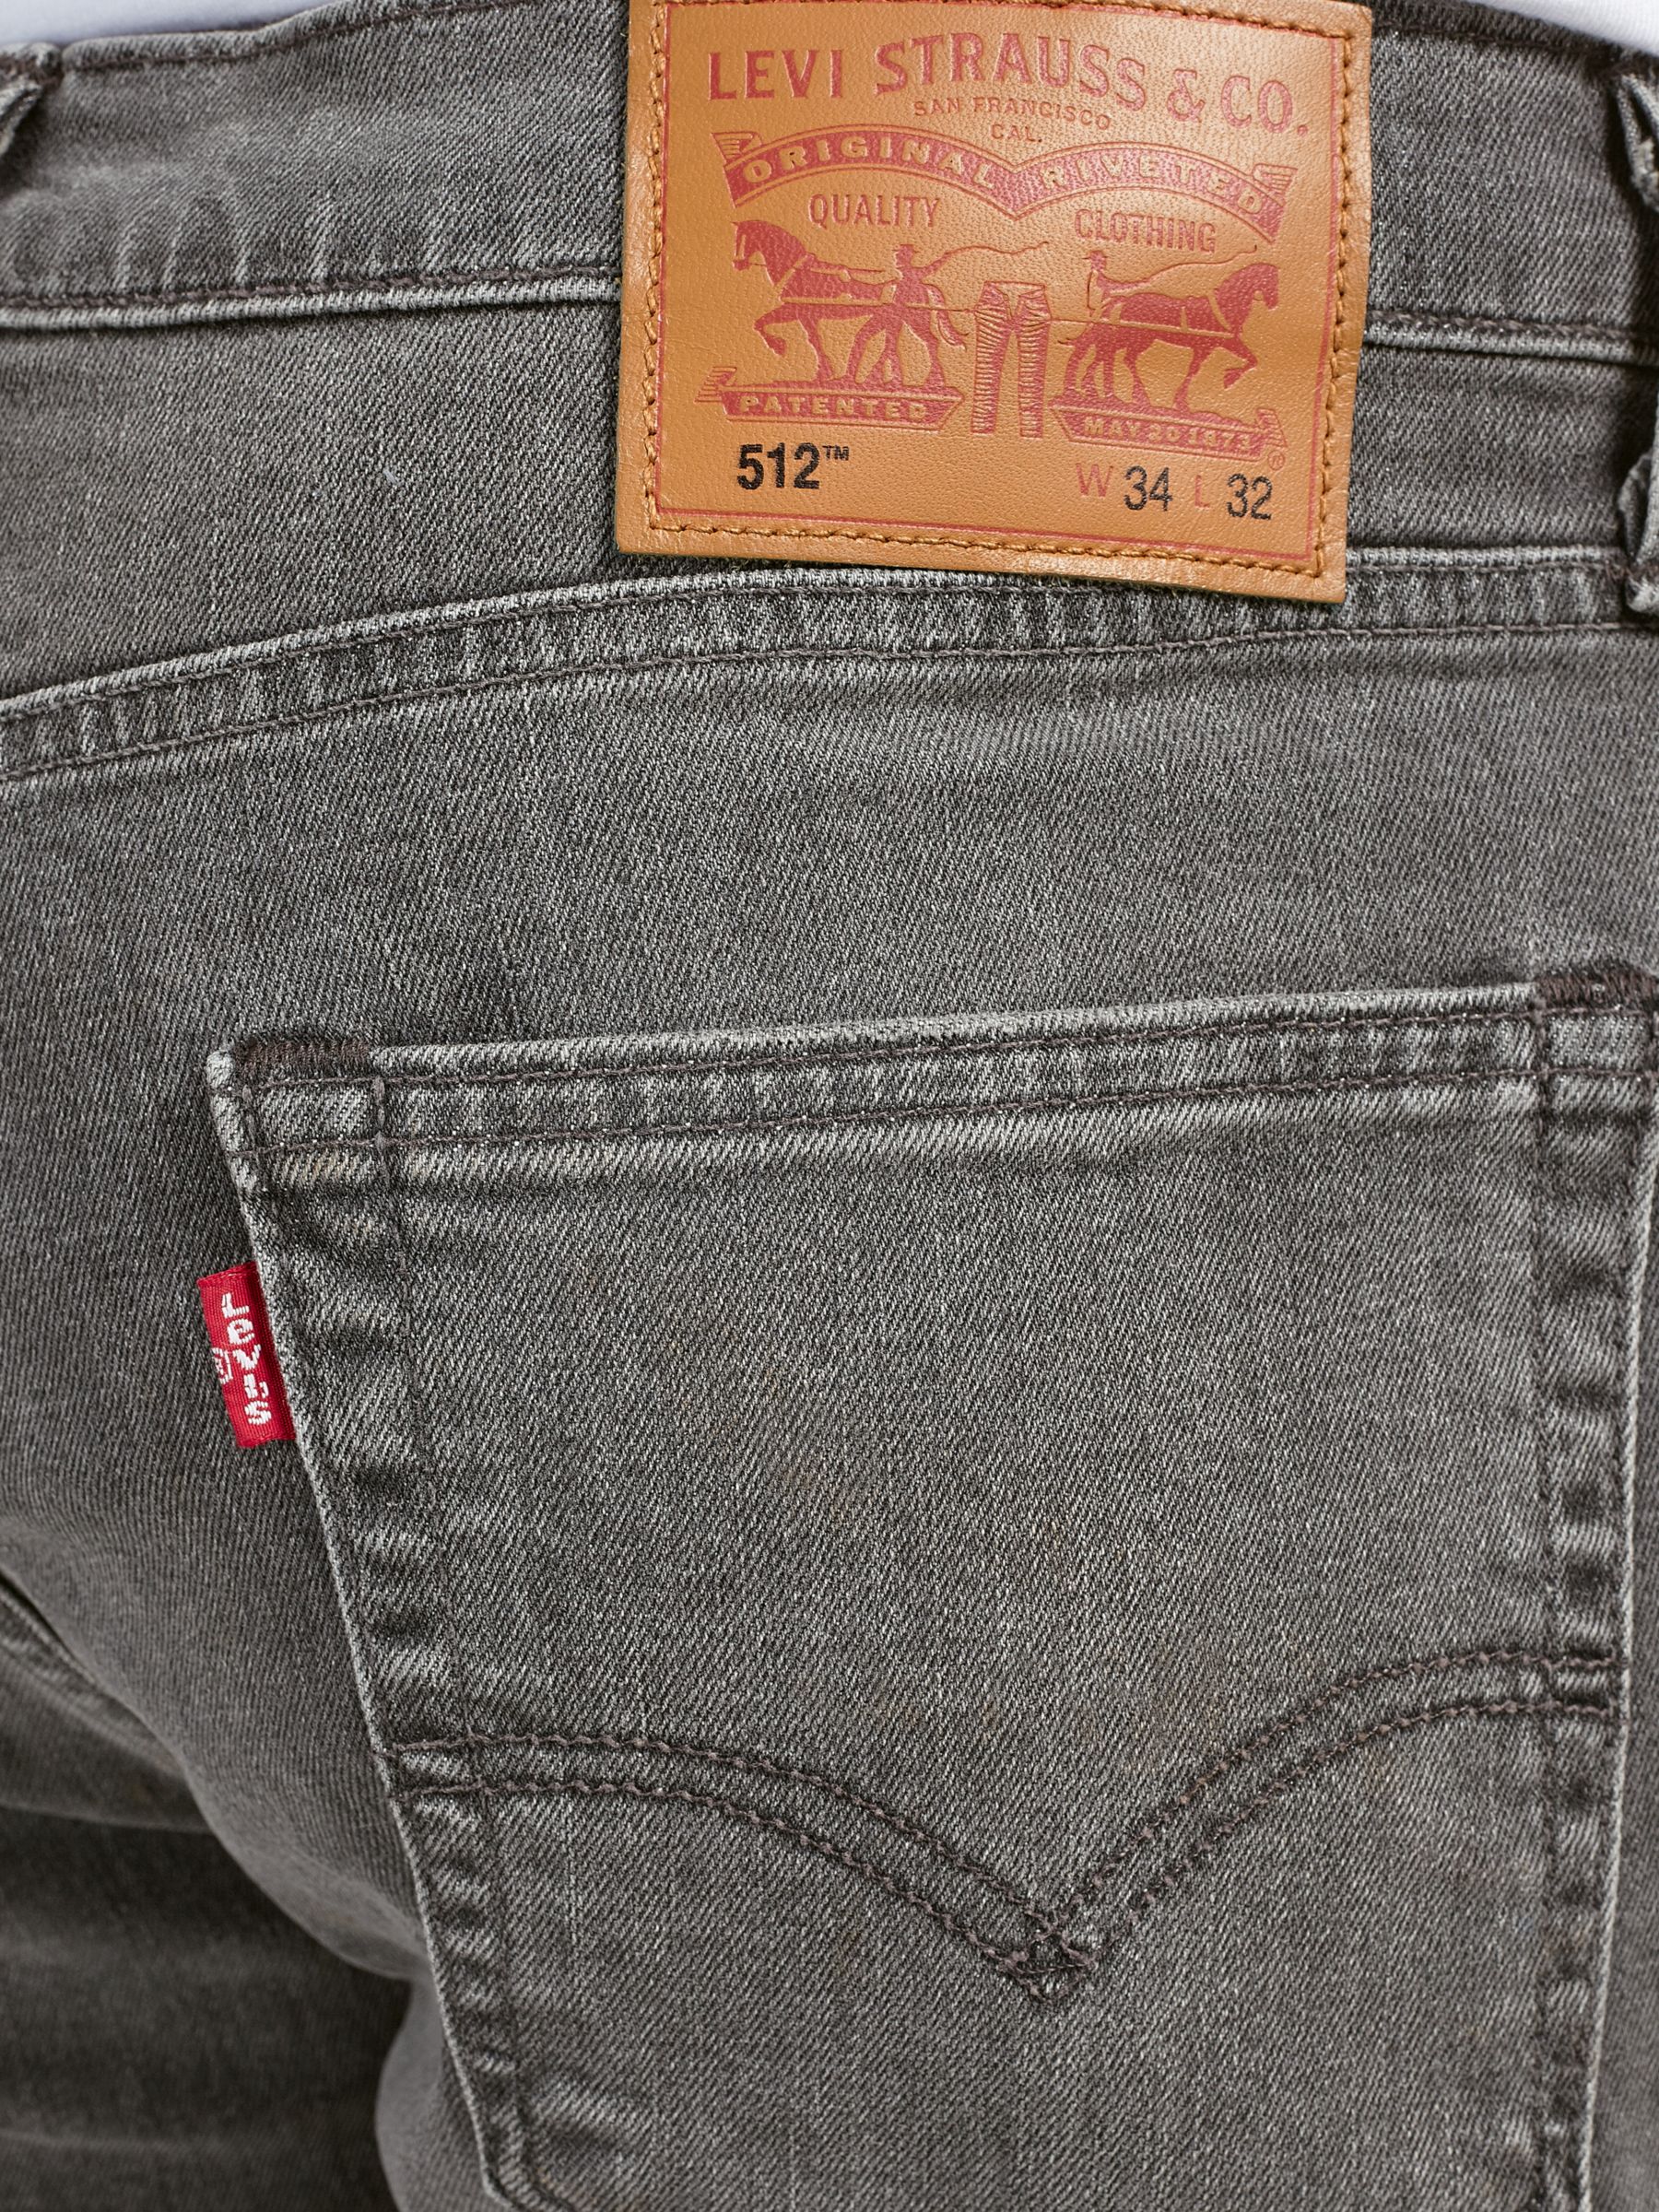 levis 512 berry hill